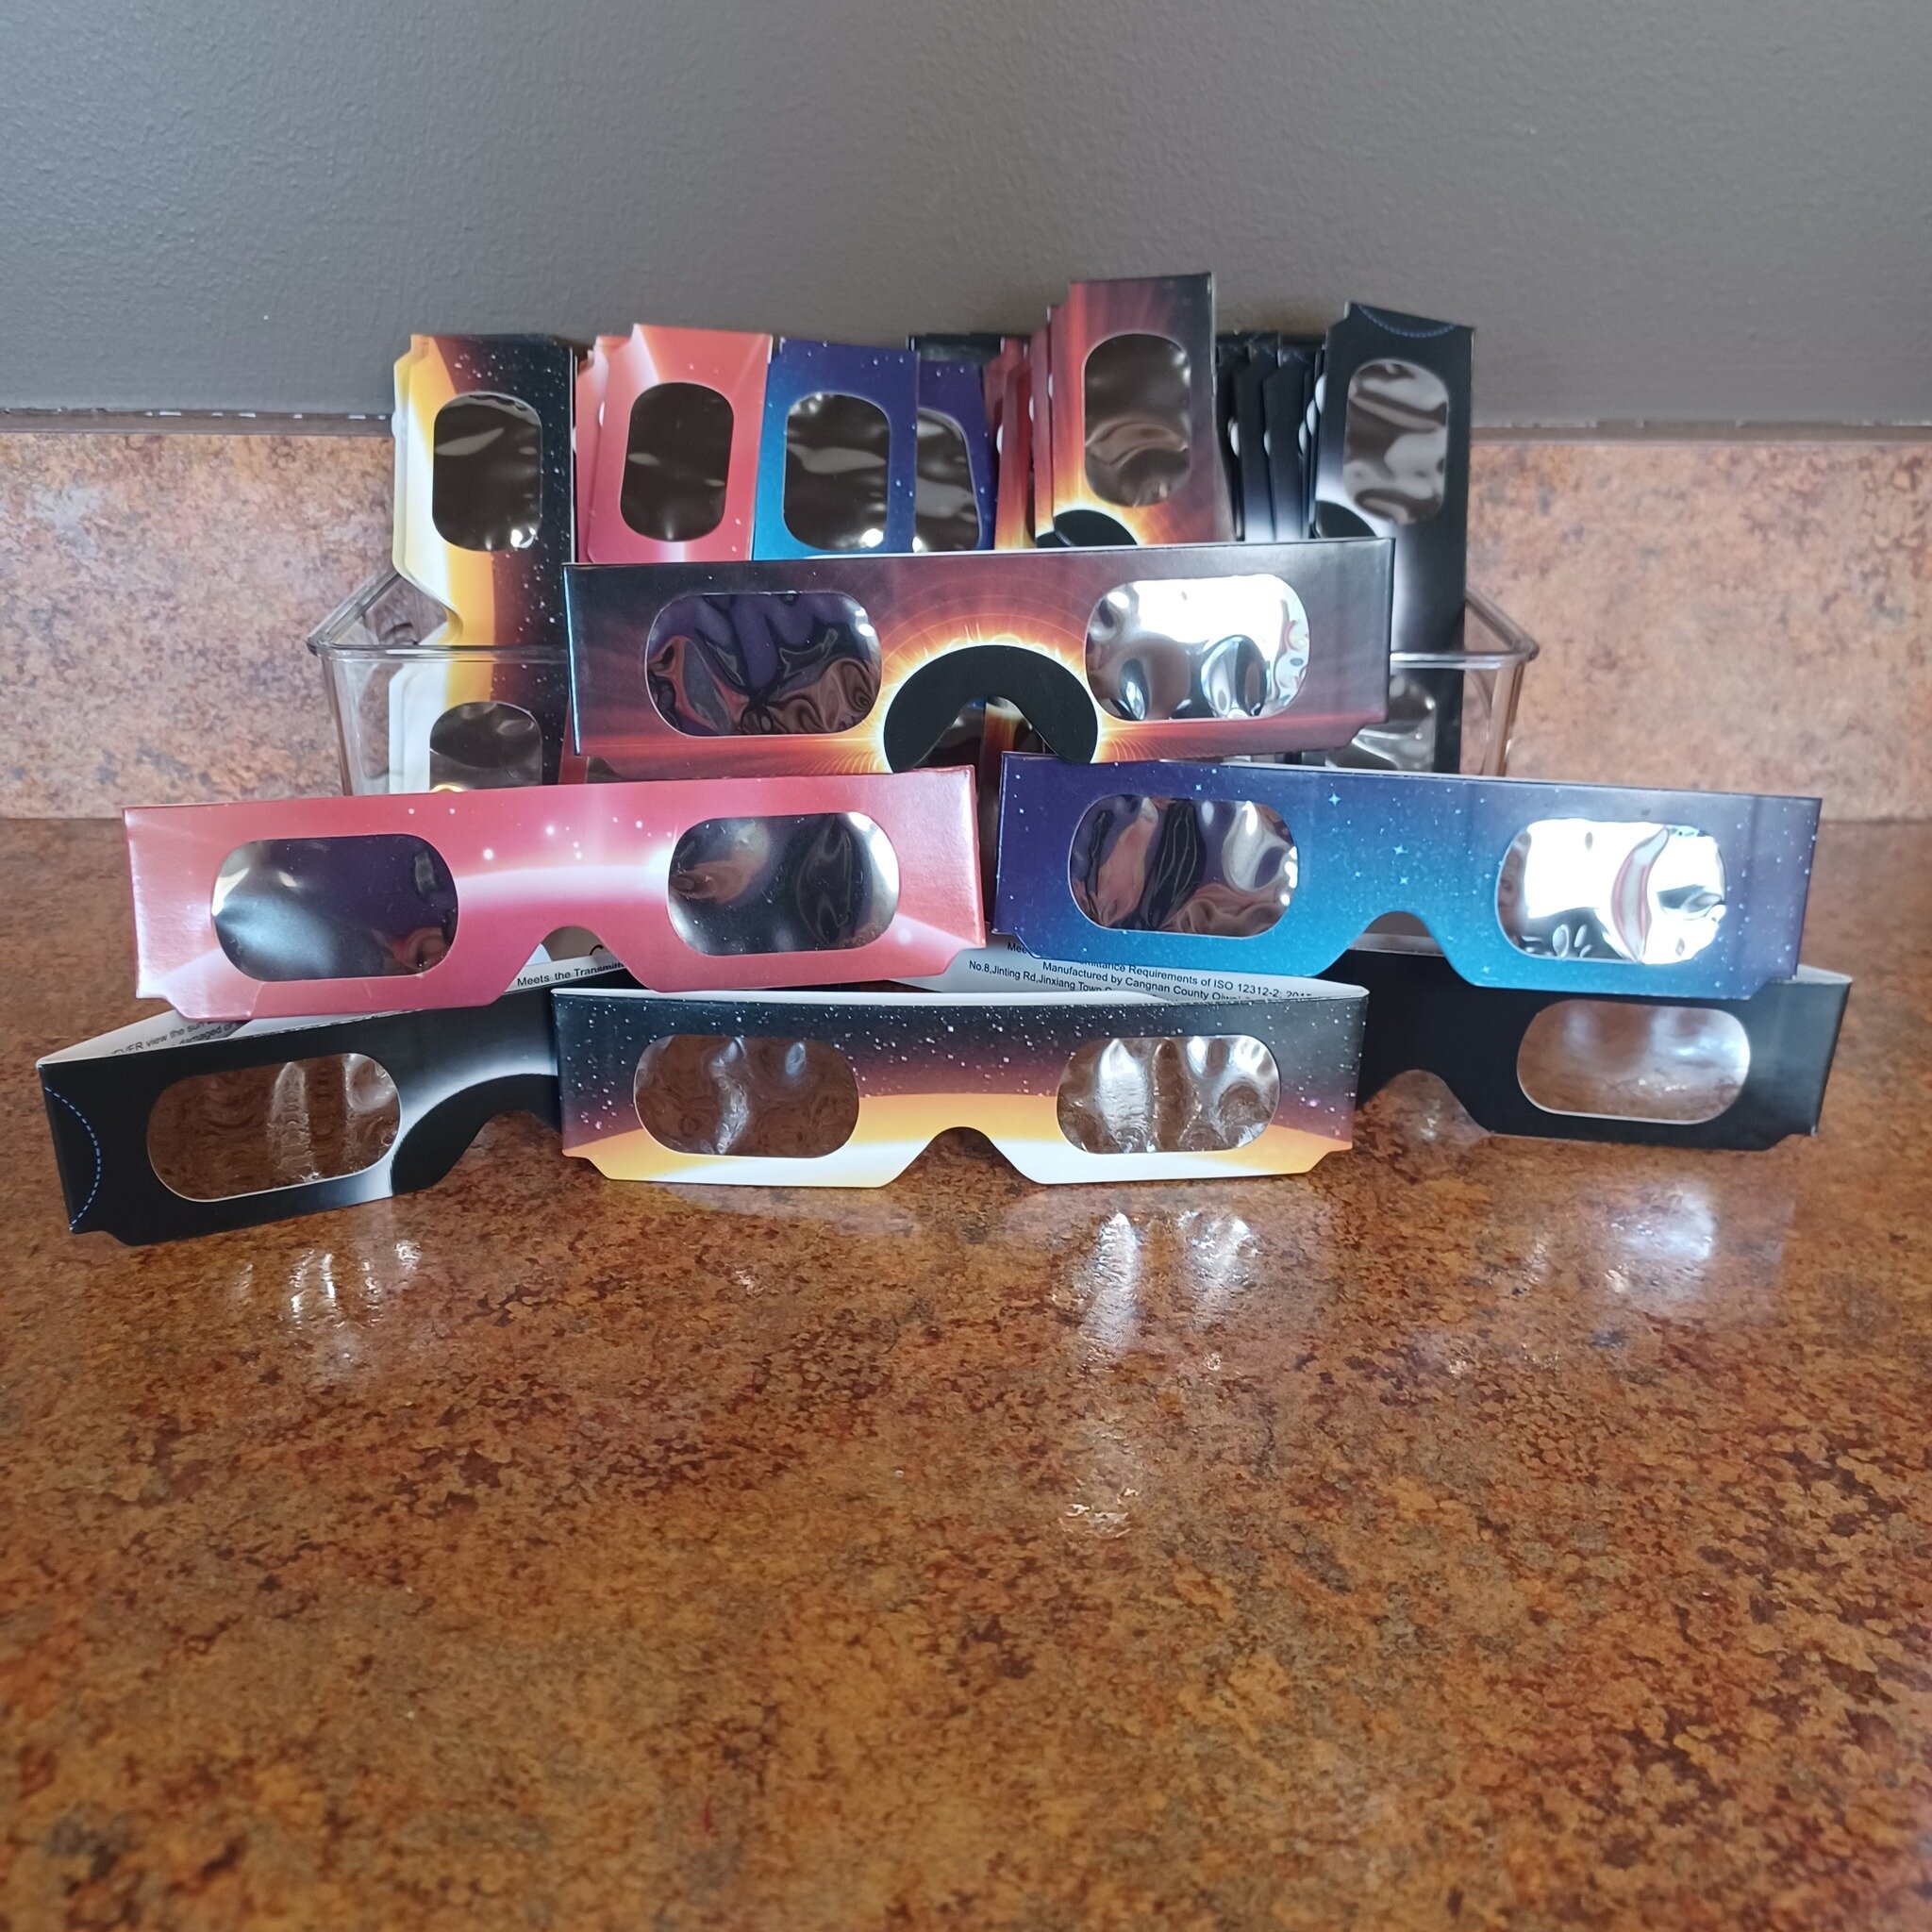 Are you excited about the upcoming solar eclipse and in need of a pair of the special glasses? Look no farther! We have some. Come get you a pair!